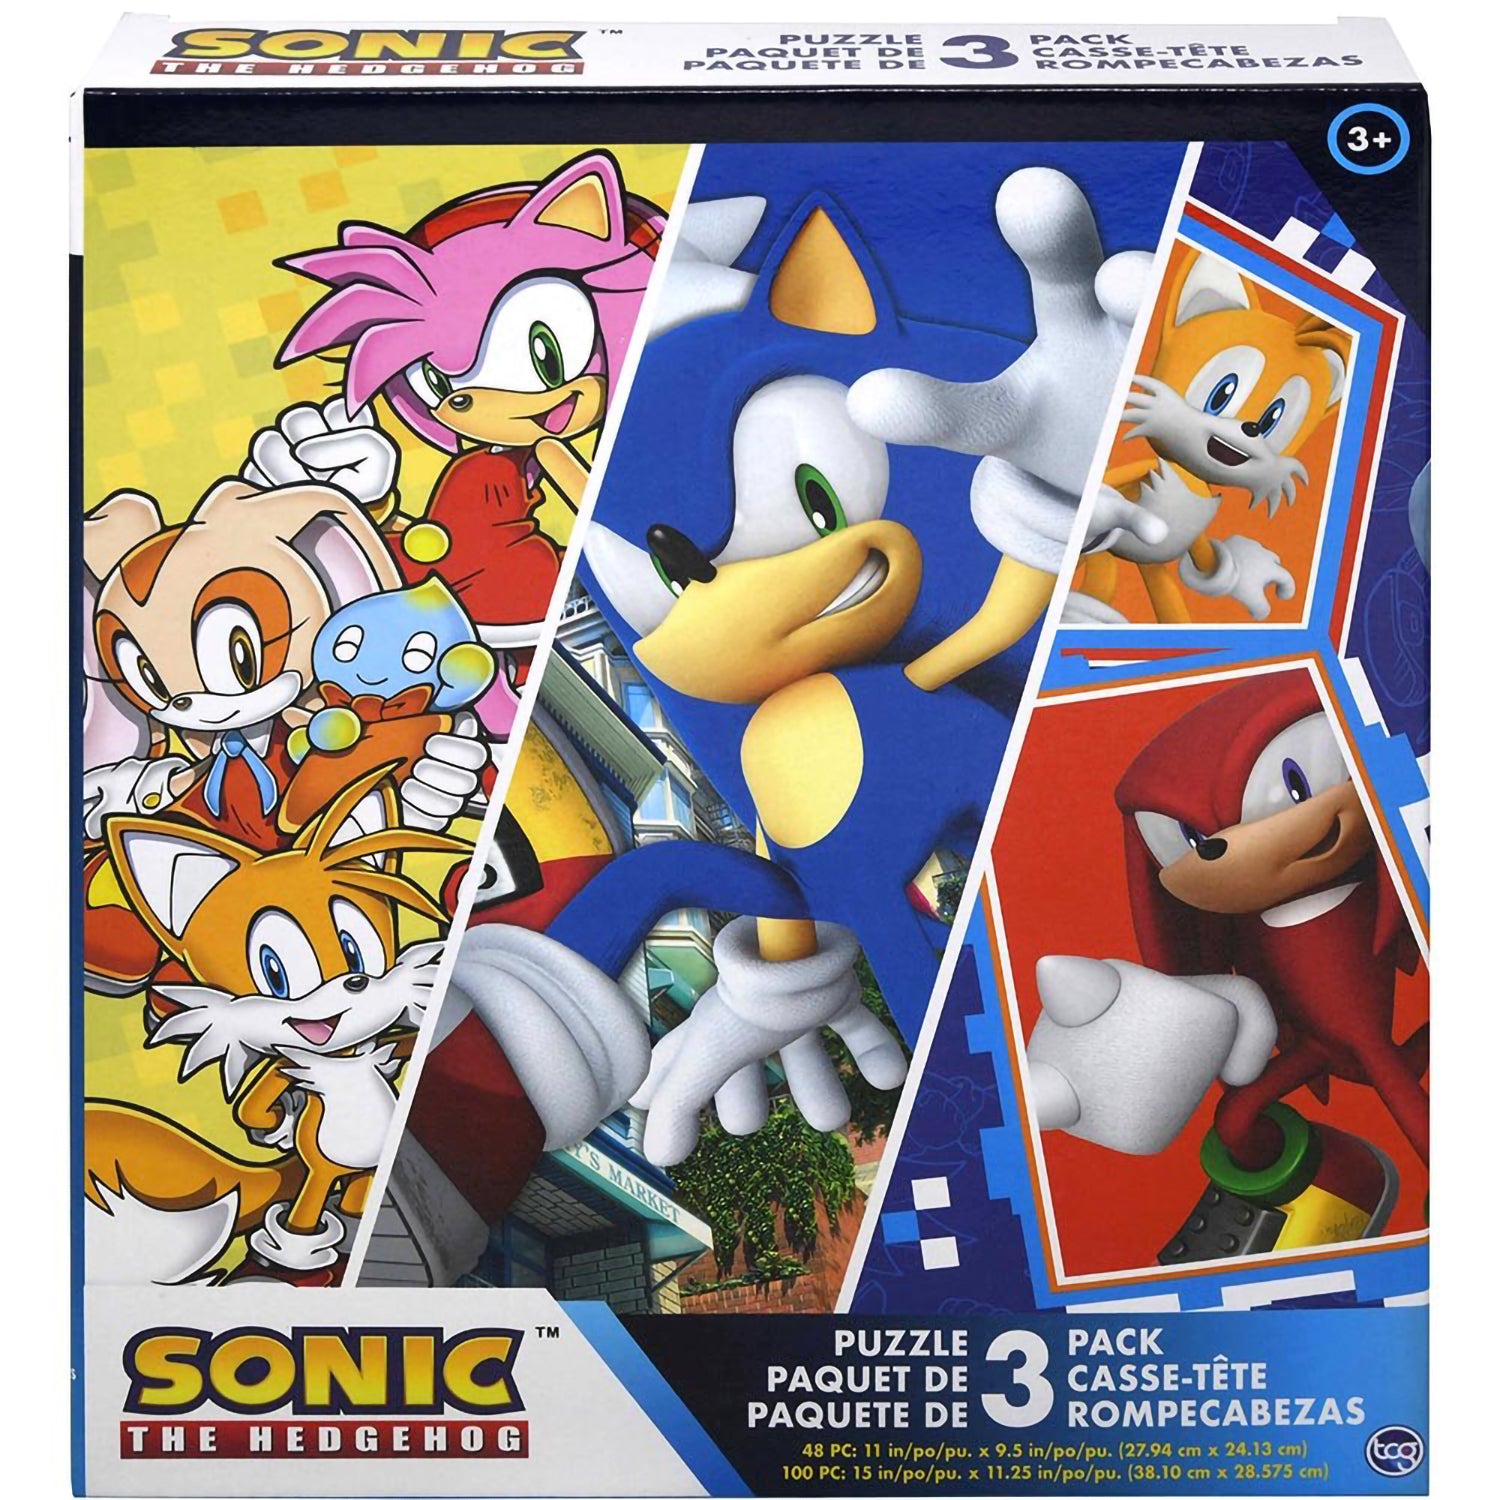 Sonic the Hedgehog 3 Puzzle Pack